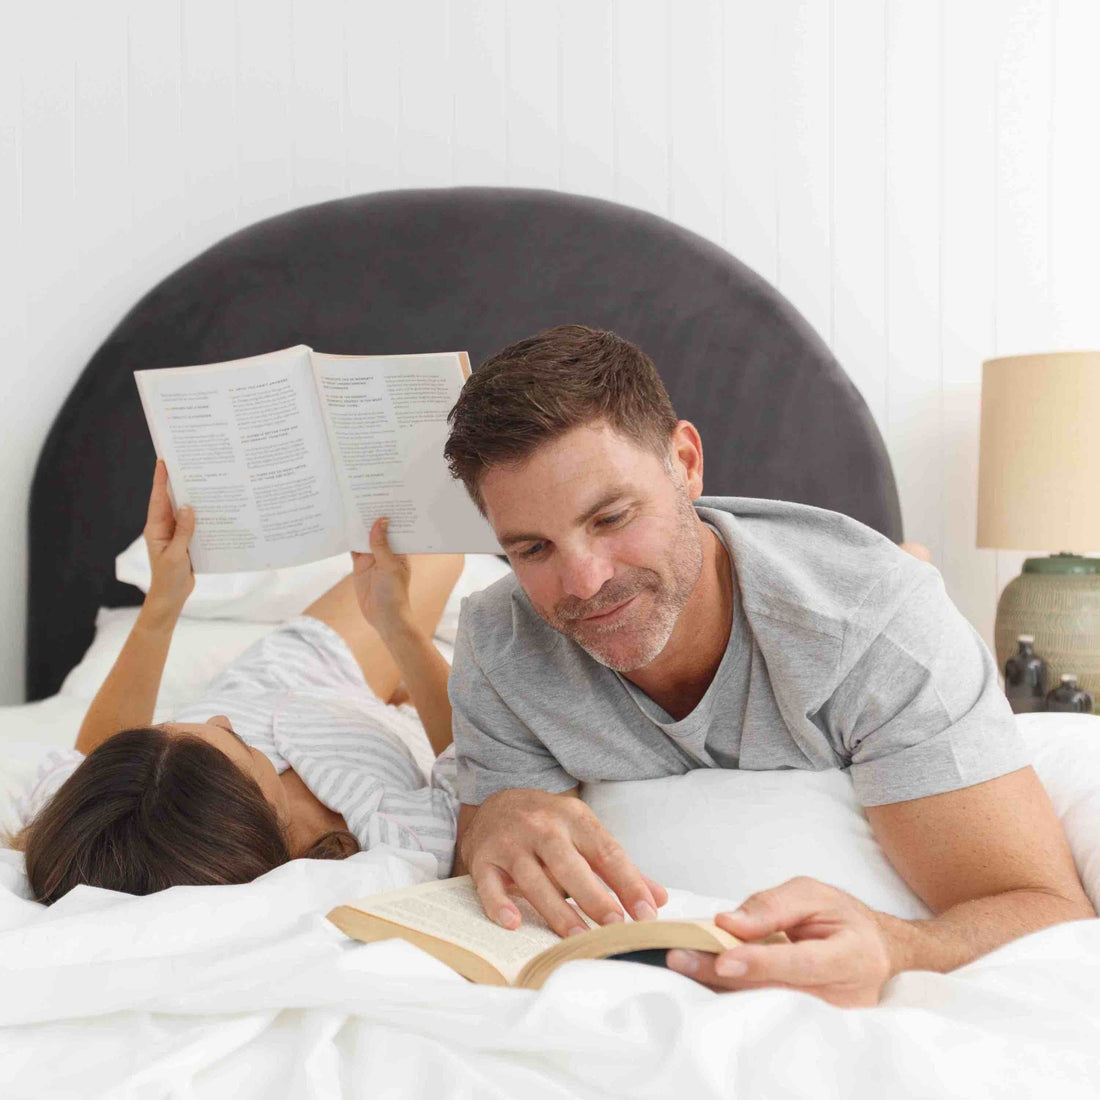 Middle aged man and woman reading a book while on their comfortable bed mattress.